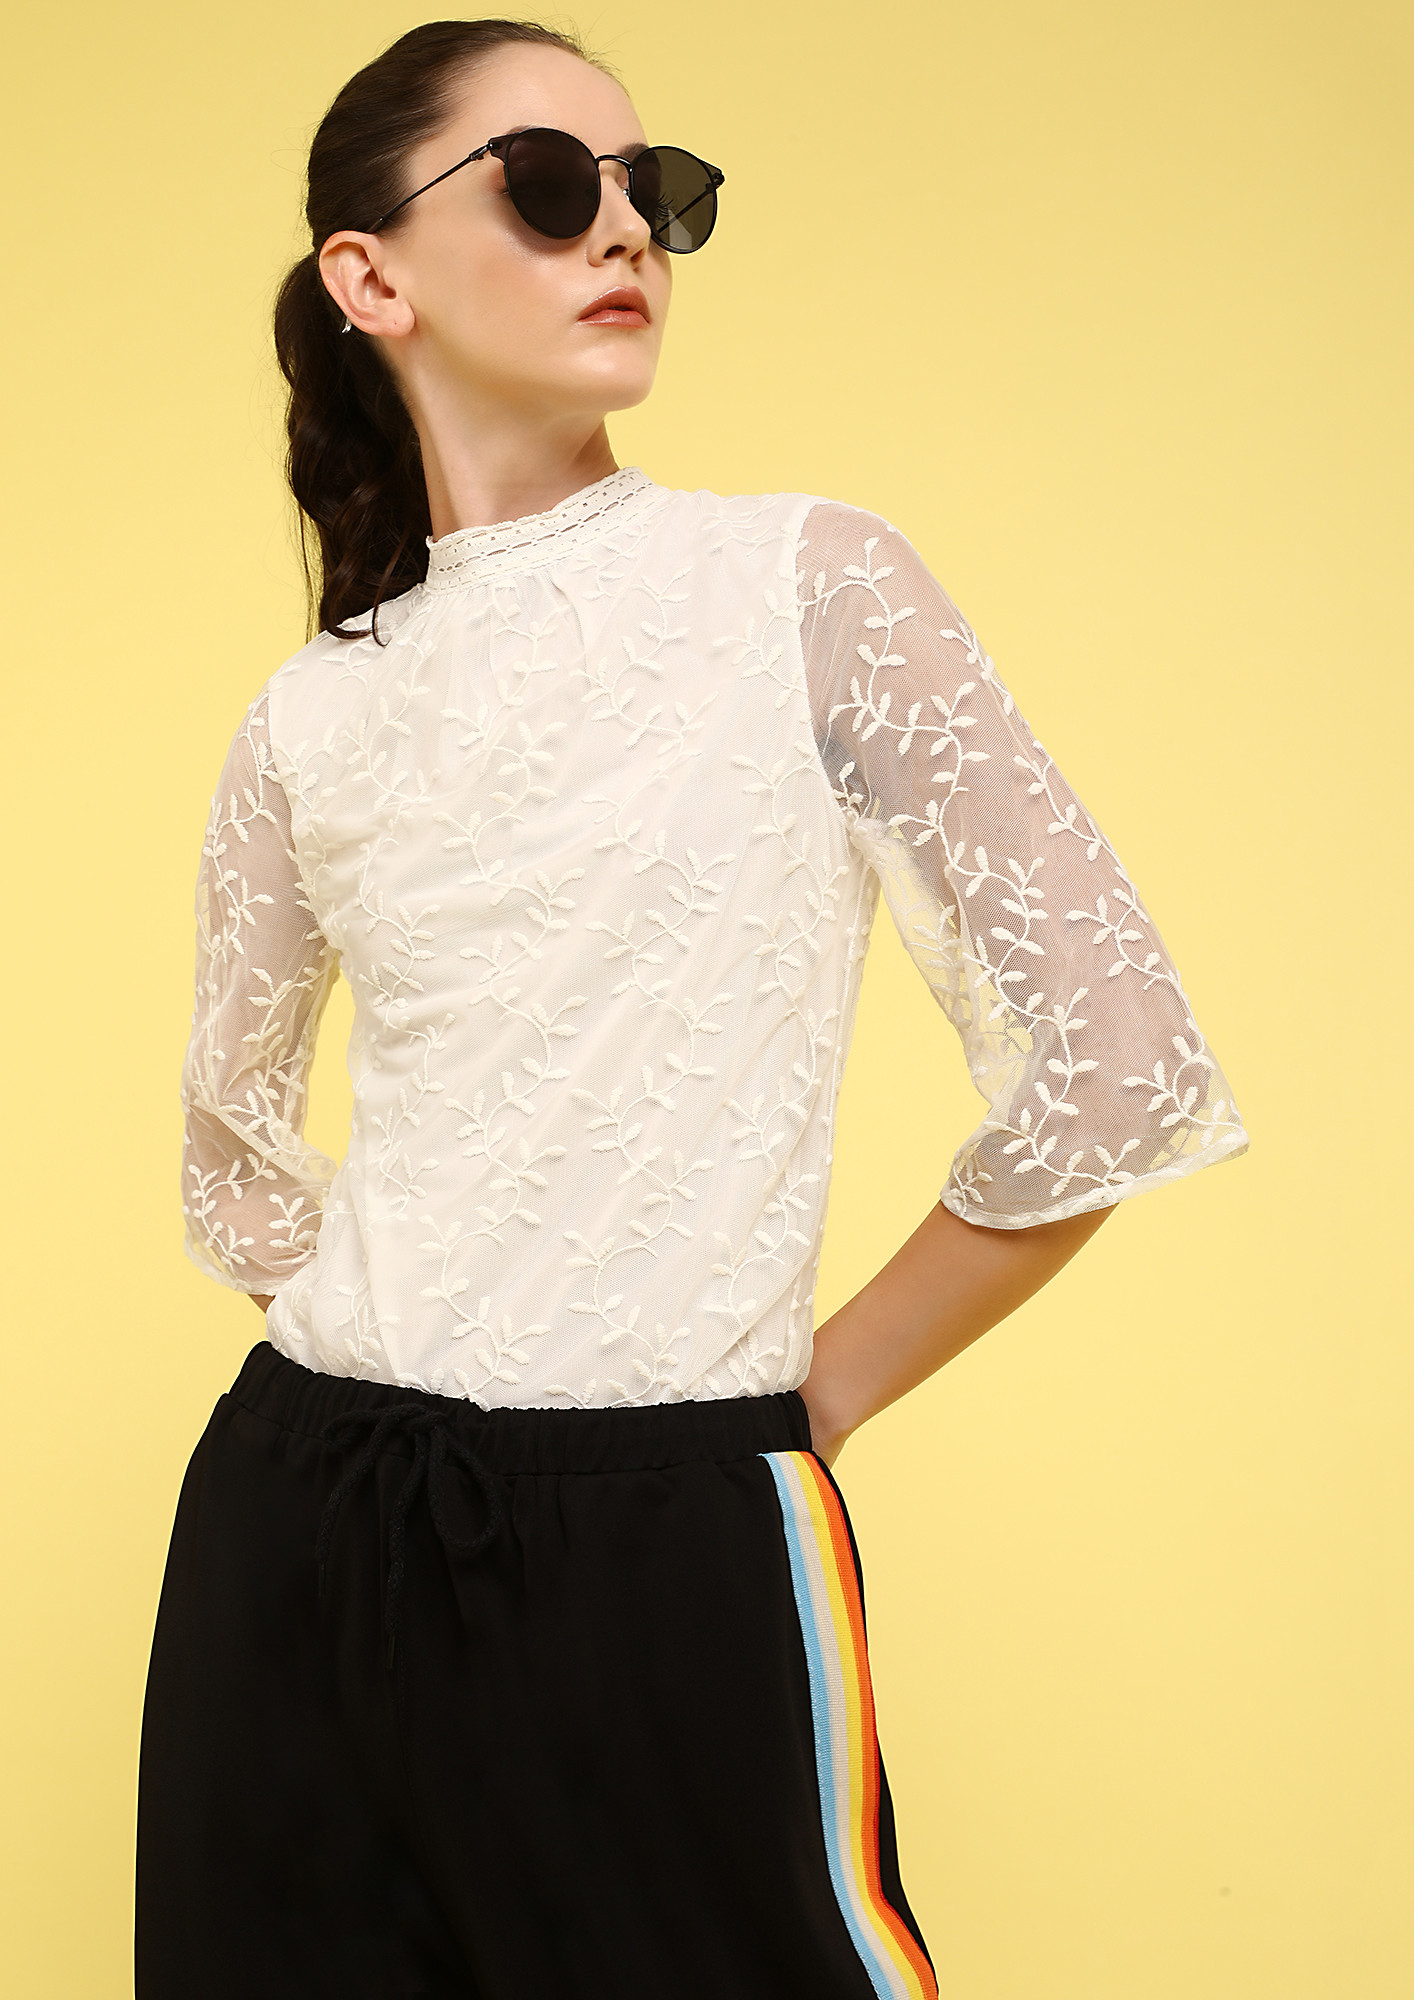 NOT YOUR DELICATE DARLING WHITE TOP